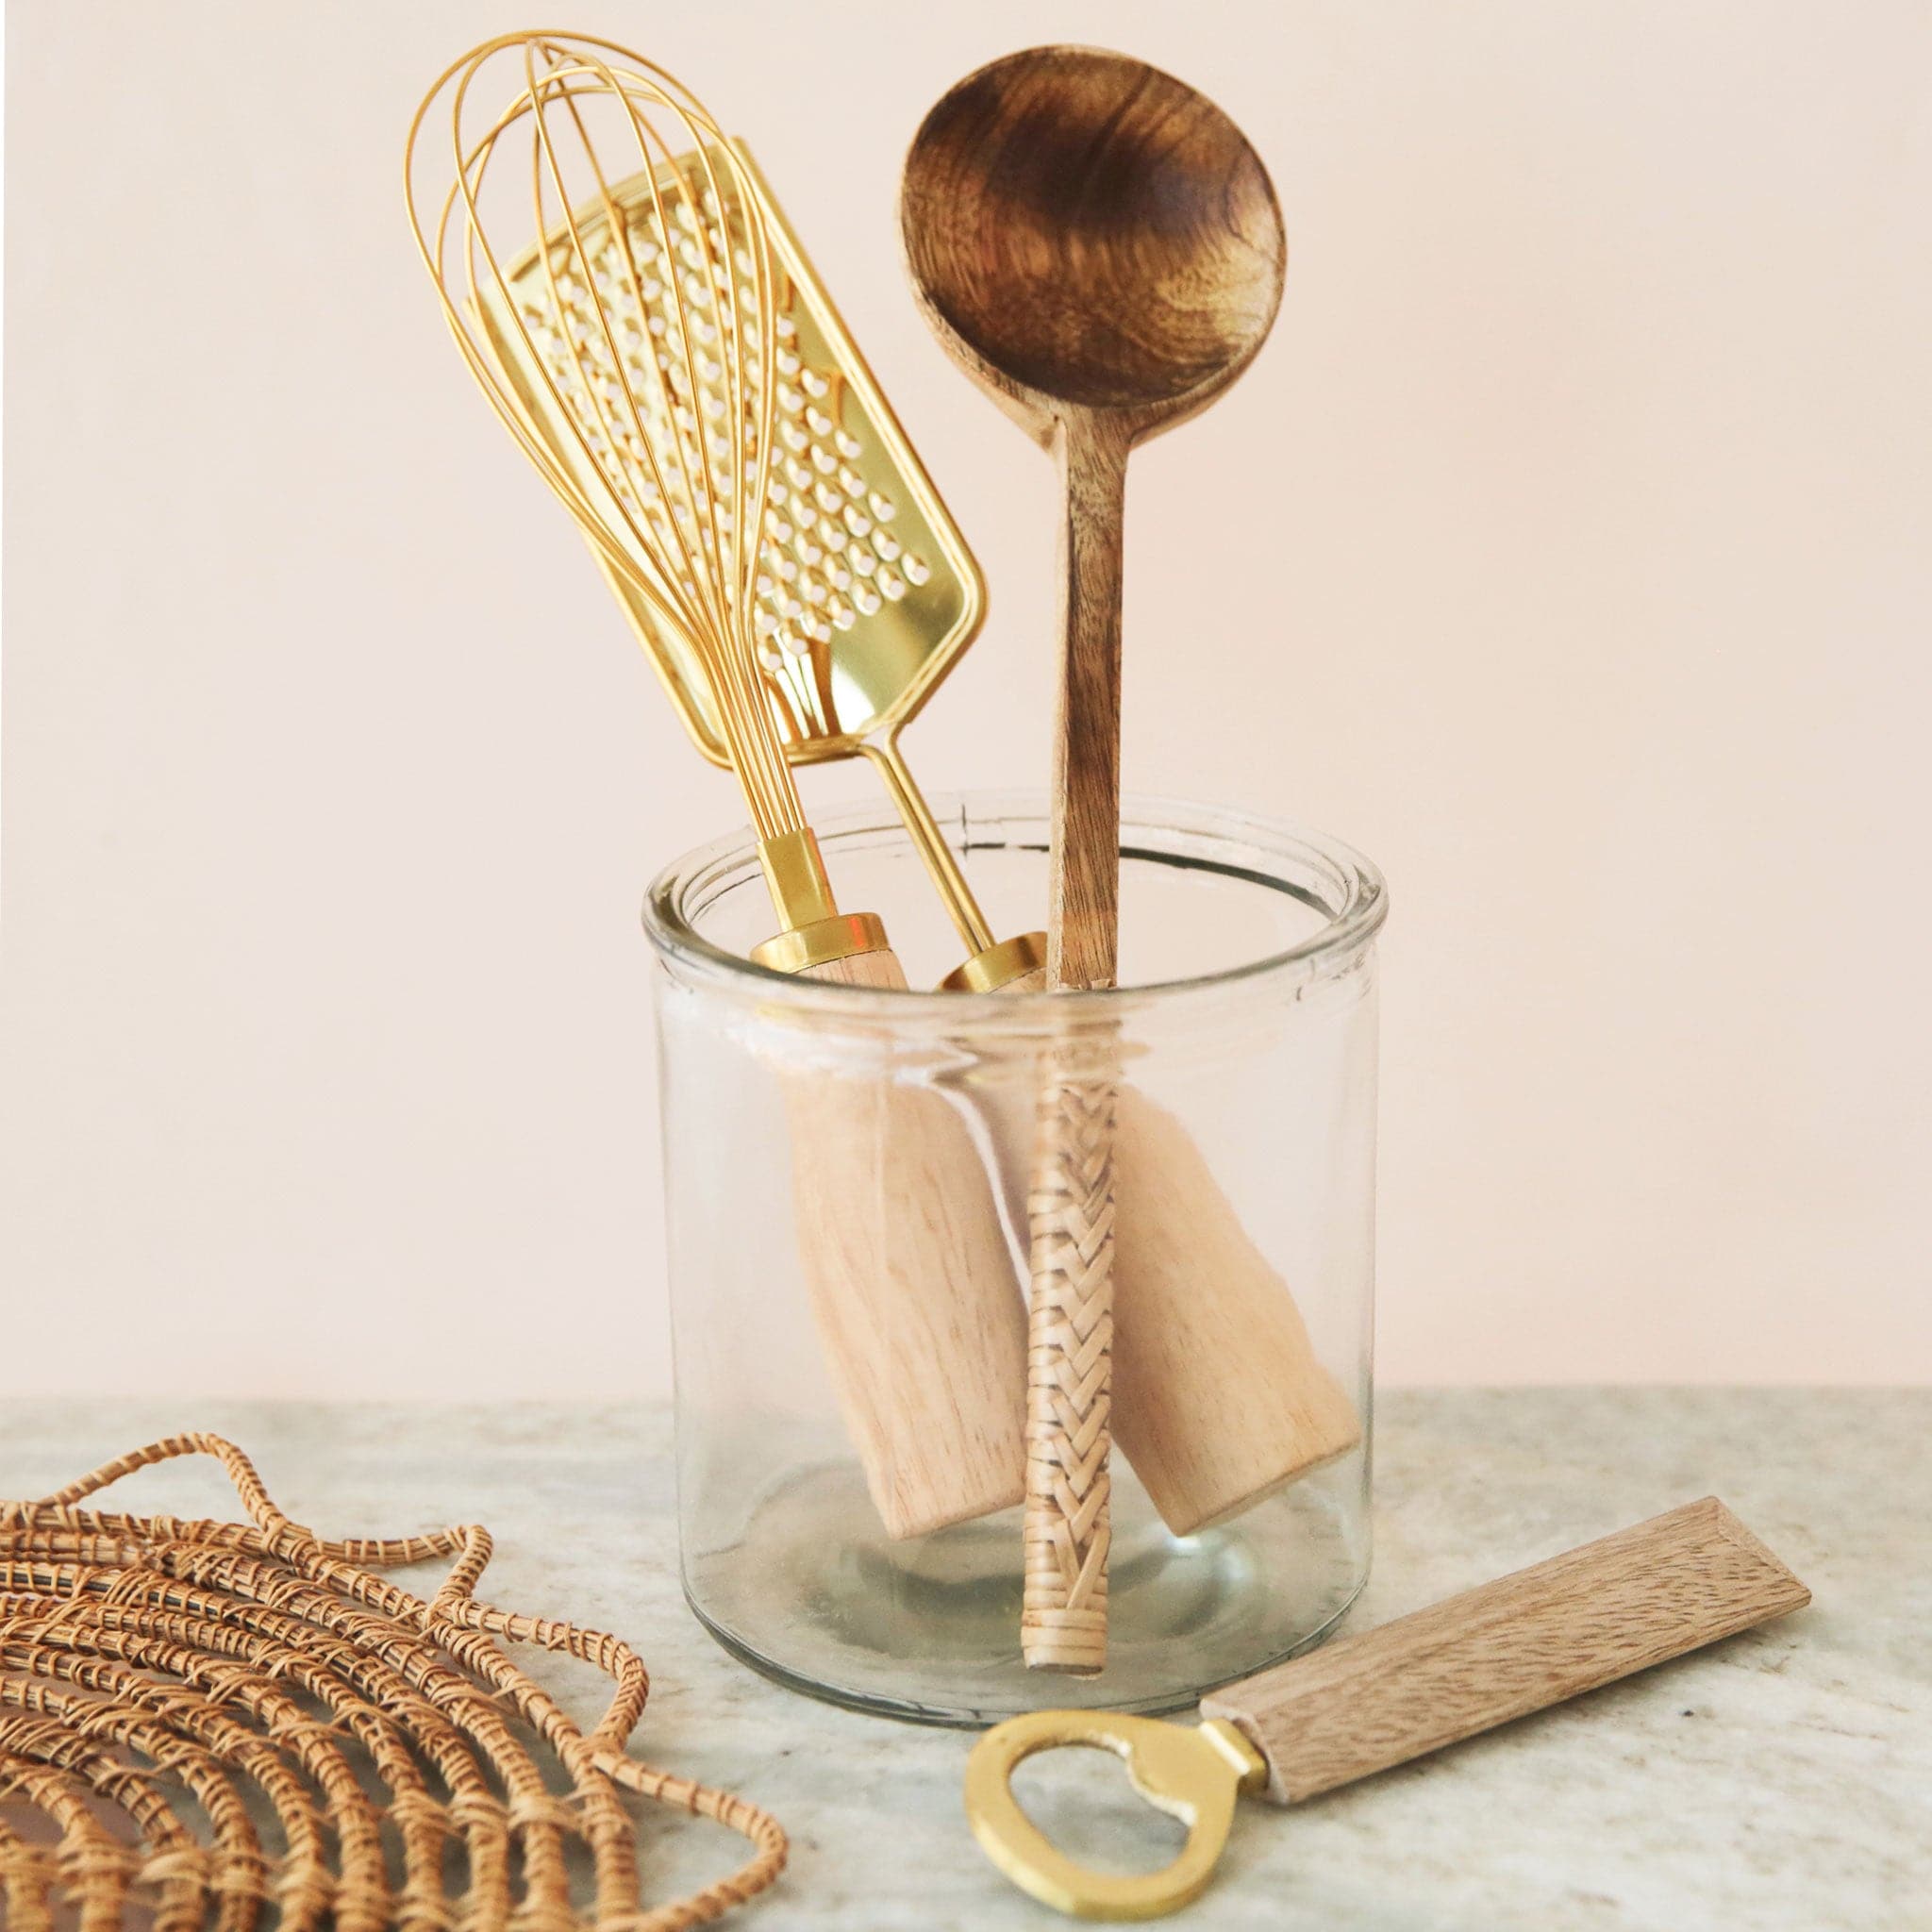 Whisk With Wood Handle